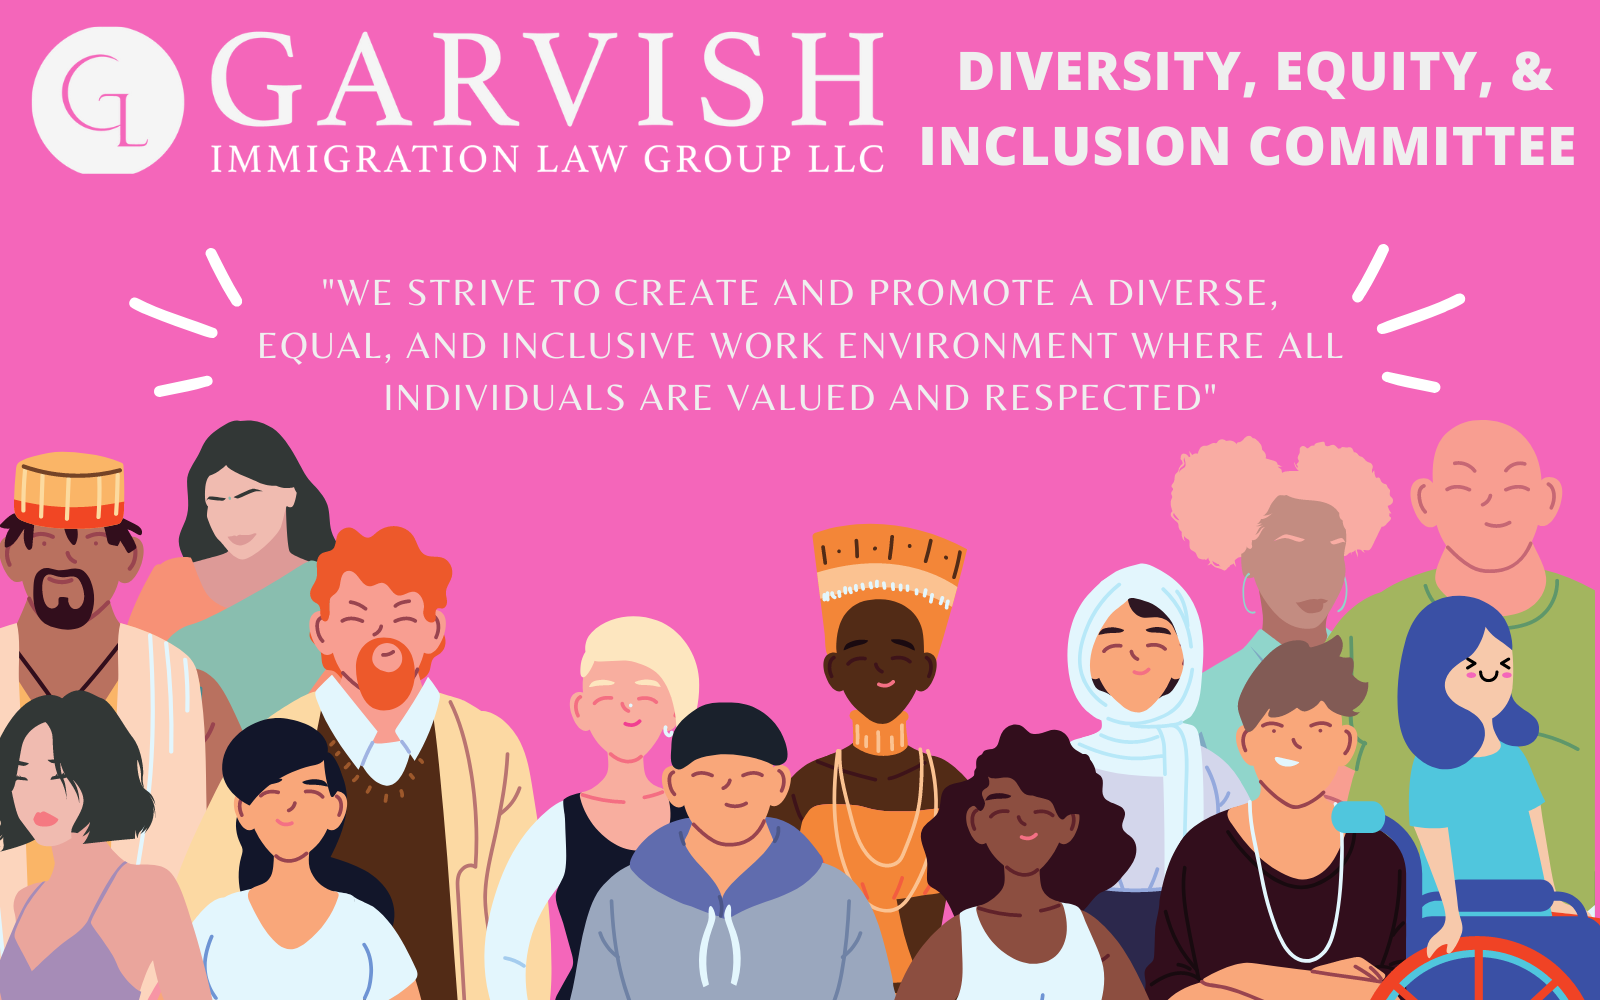 Diversity Equity Inclusion Committee Garvish Immigration Law Group